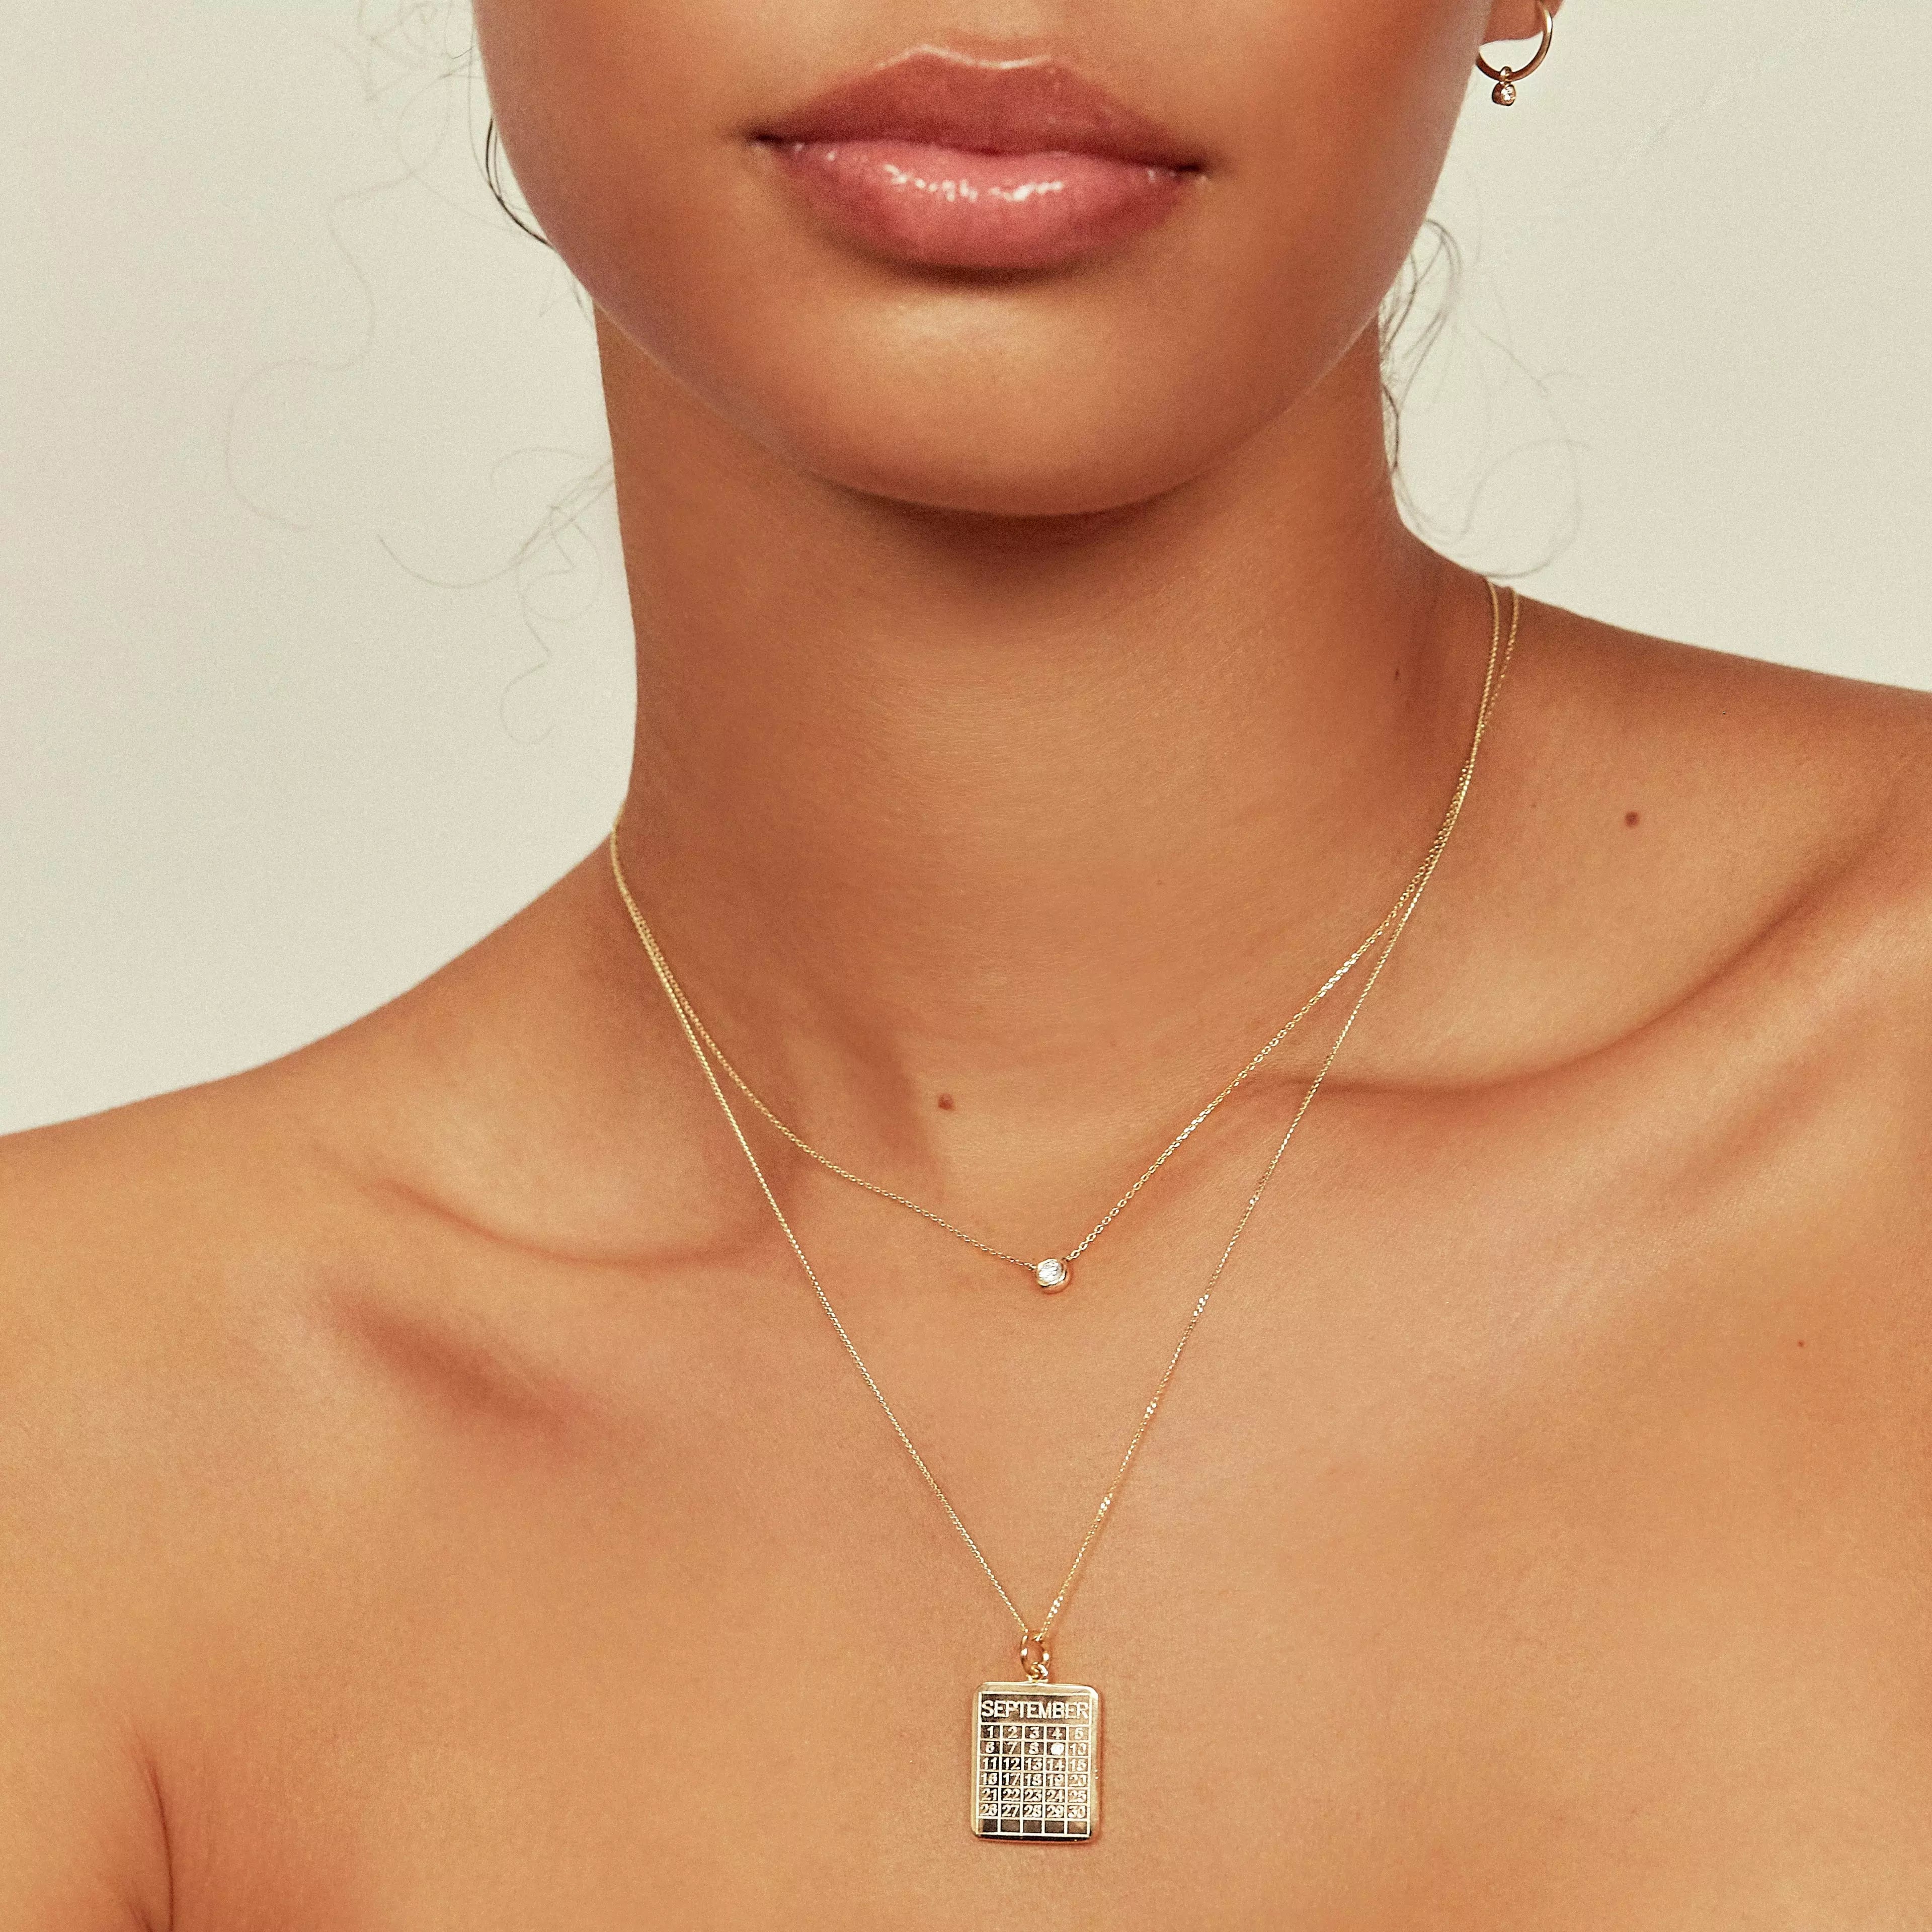 Gold special date calendar necklace around a neck layered with a gold single diamond choker